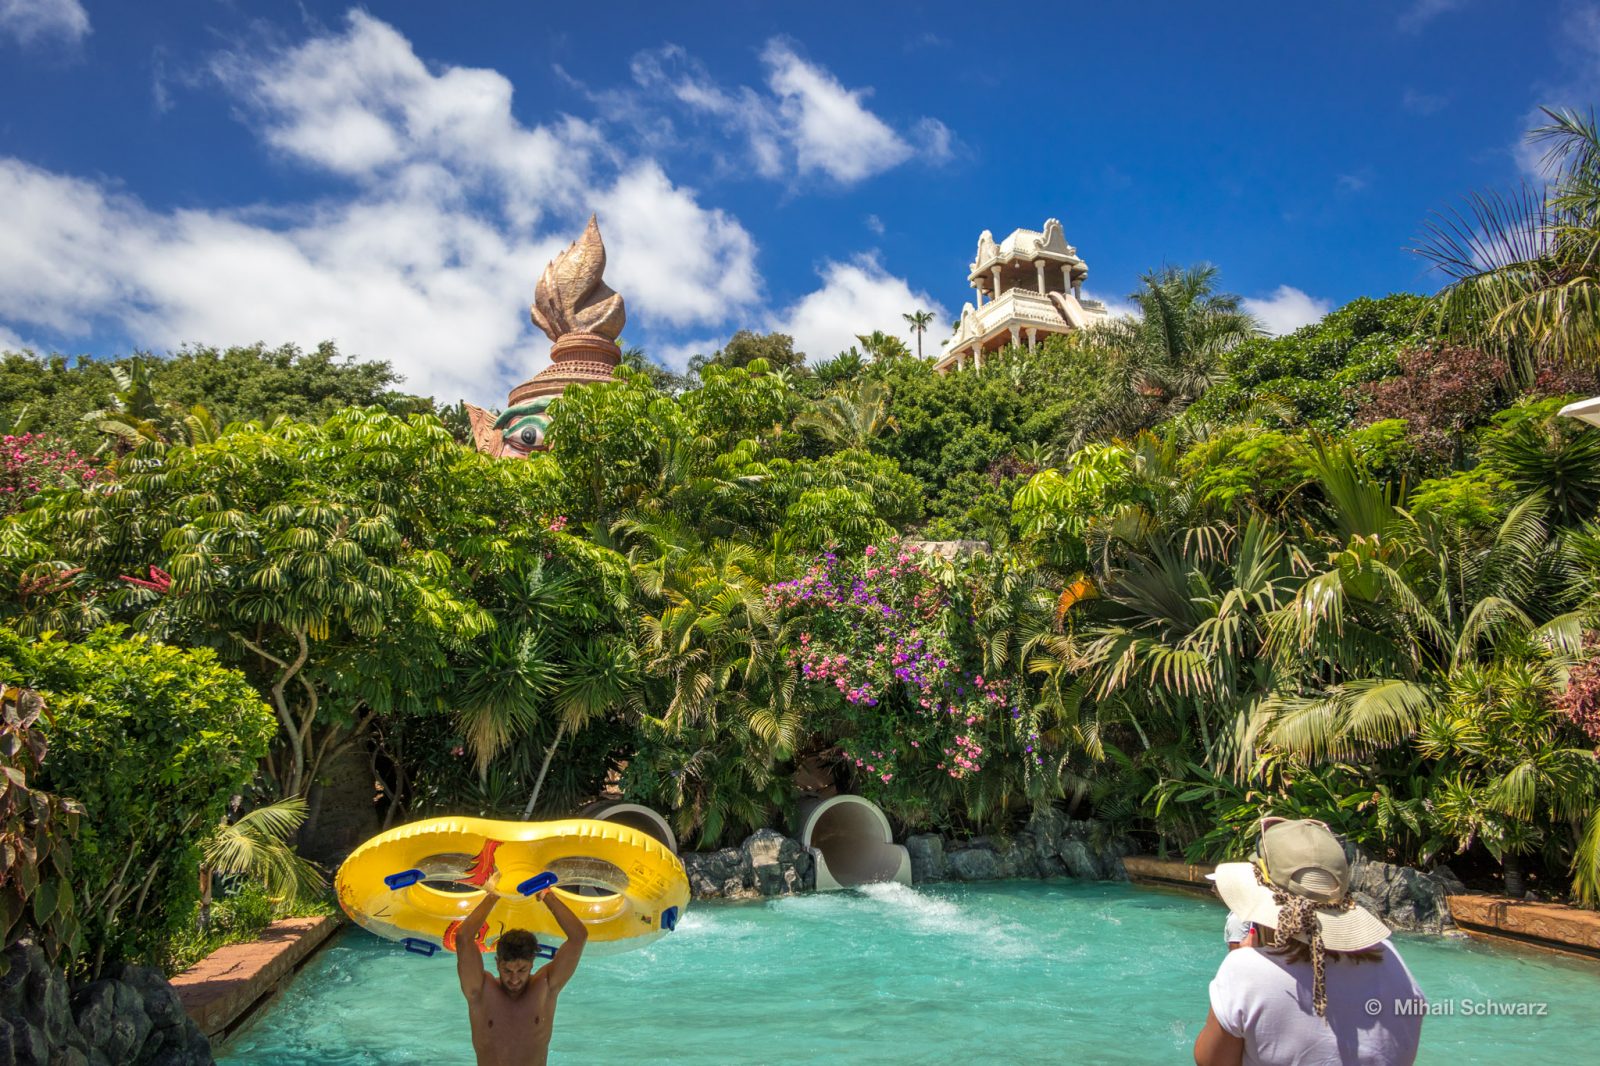 The Giant in Siam Park